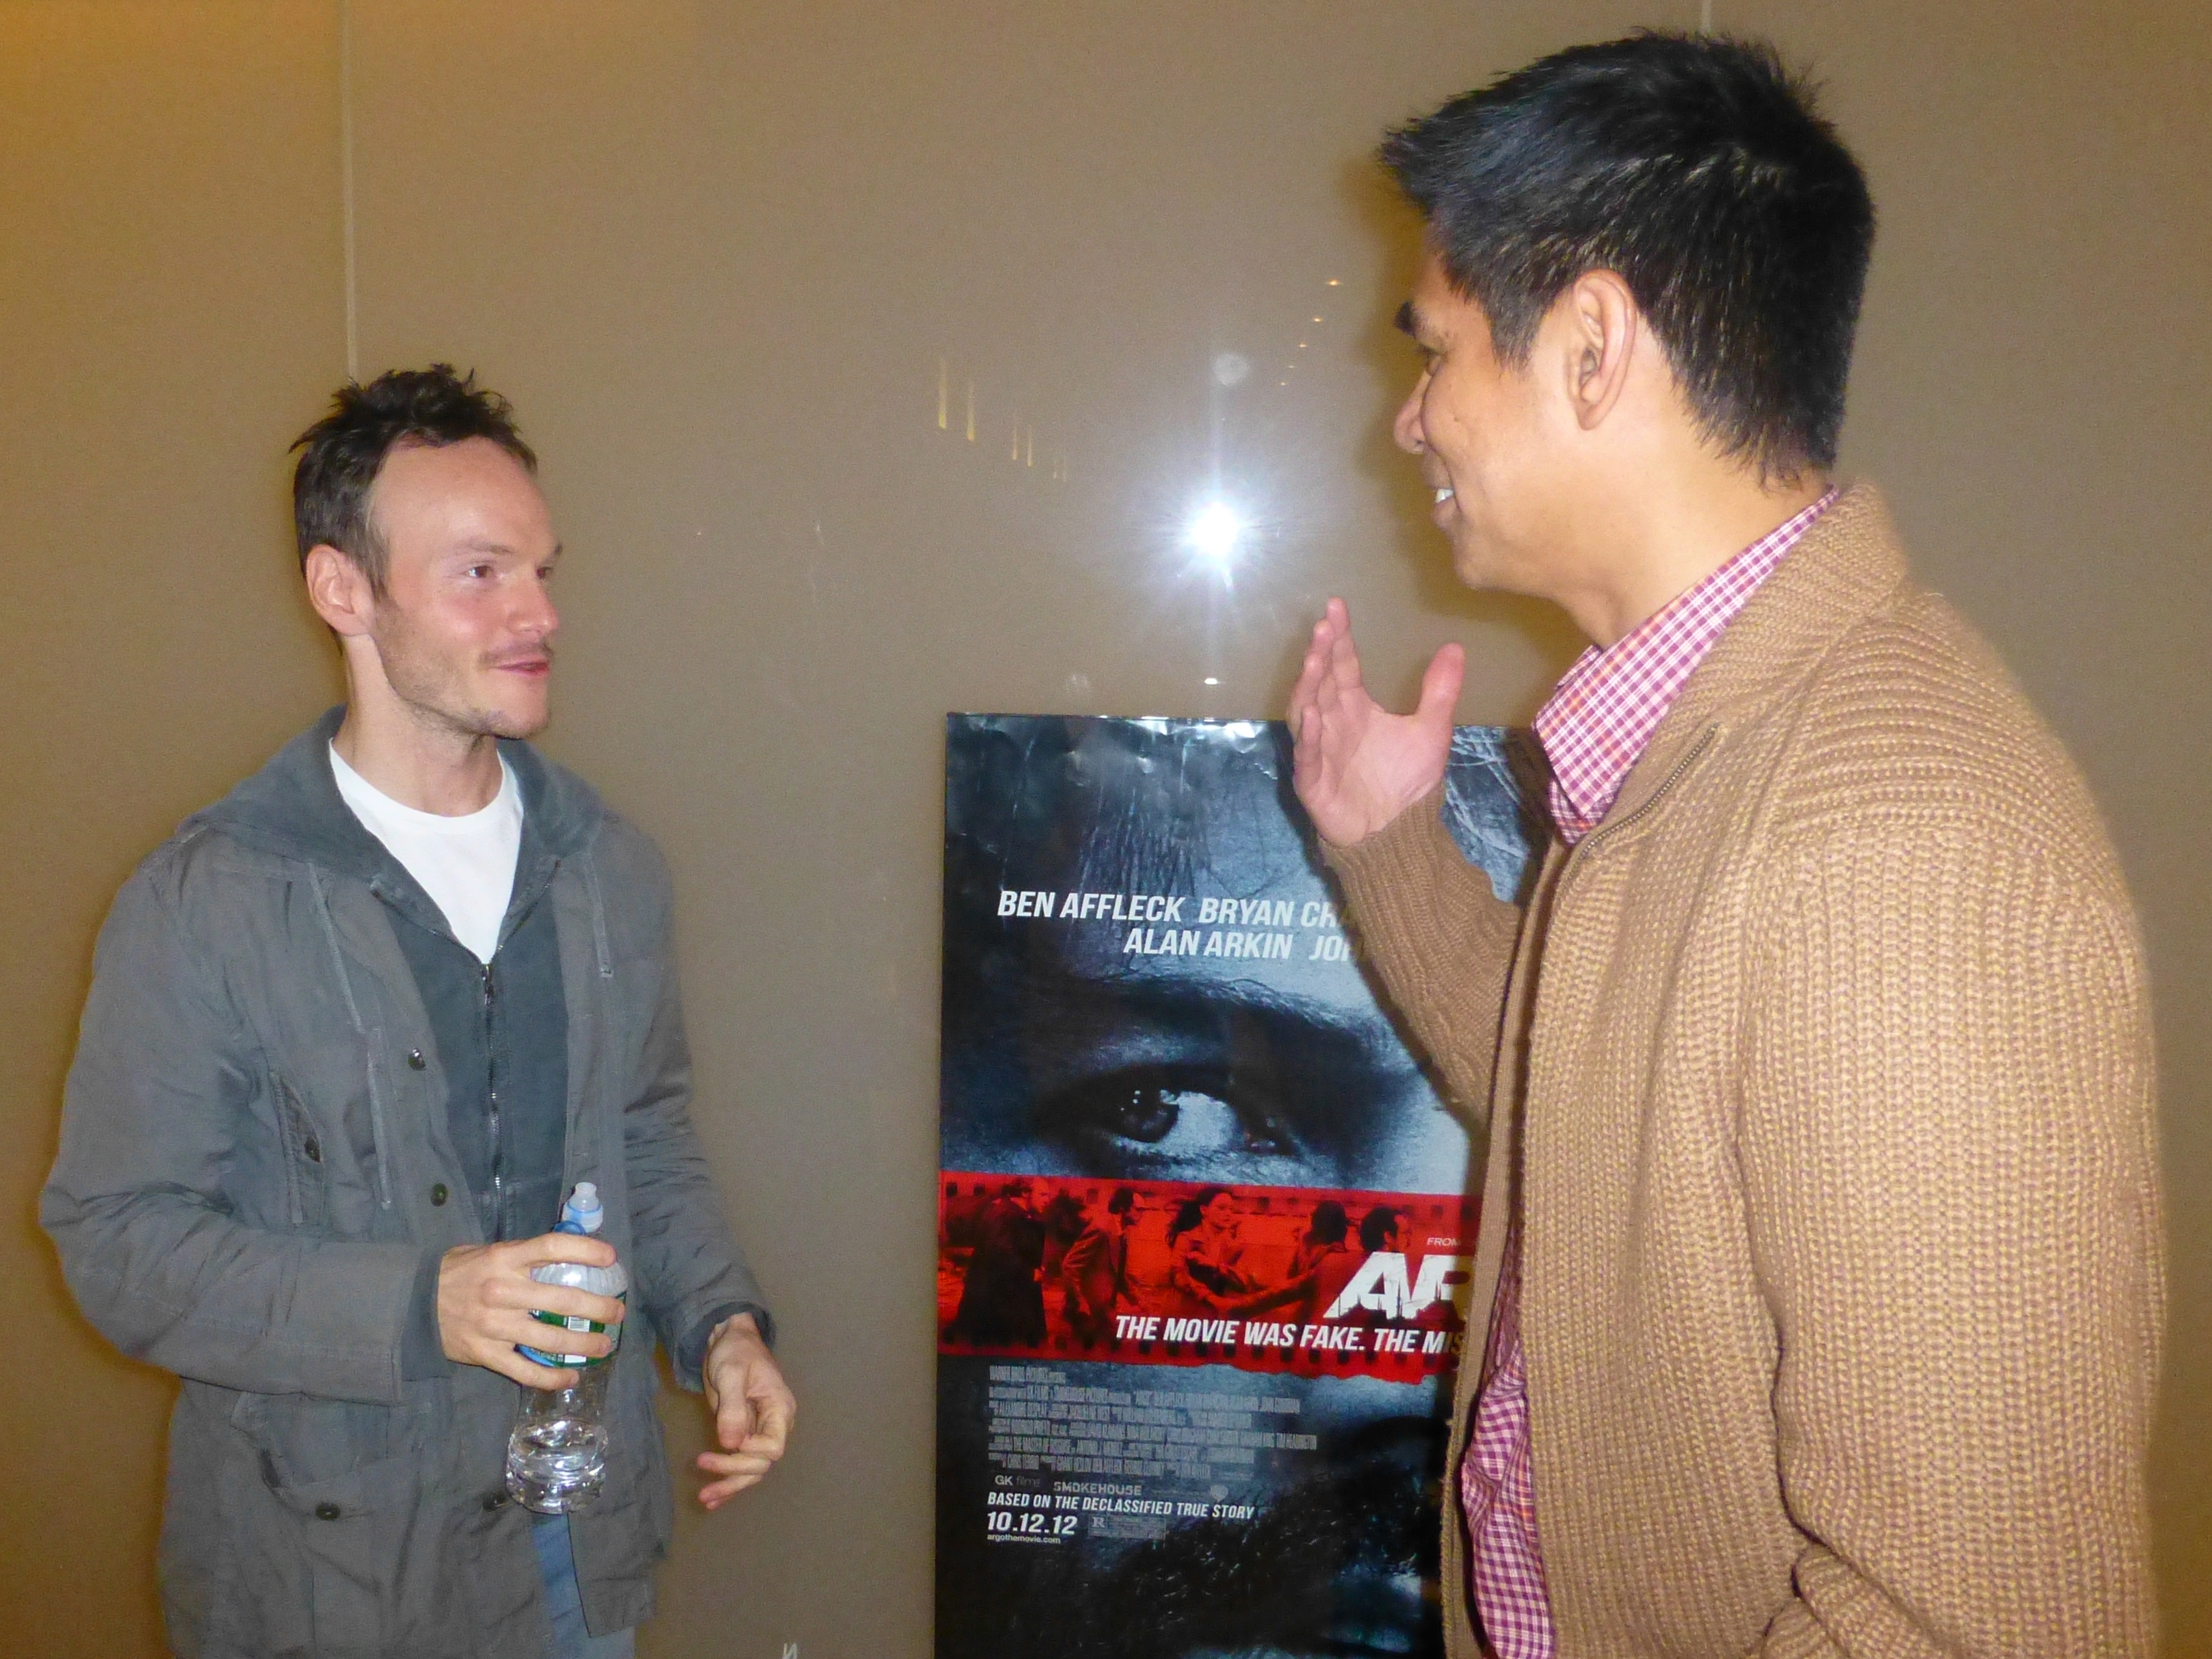 Screenwriter Chris Terrio after screening of Argo who won Oscar for Best Writing, Adapted Screenplay for Argo